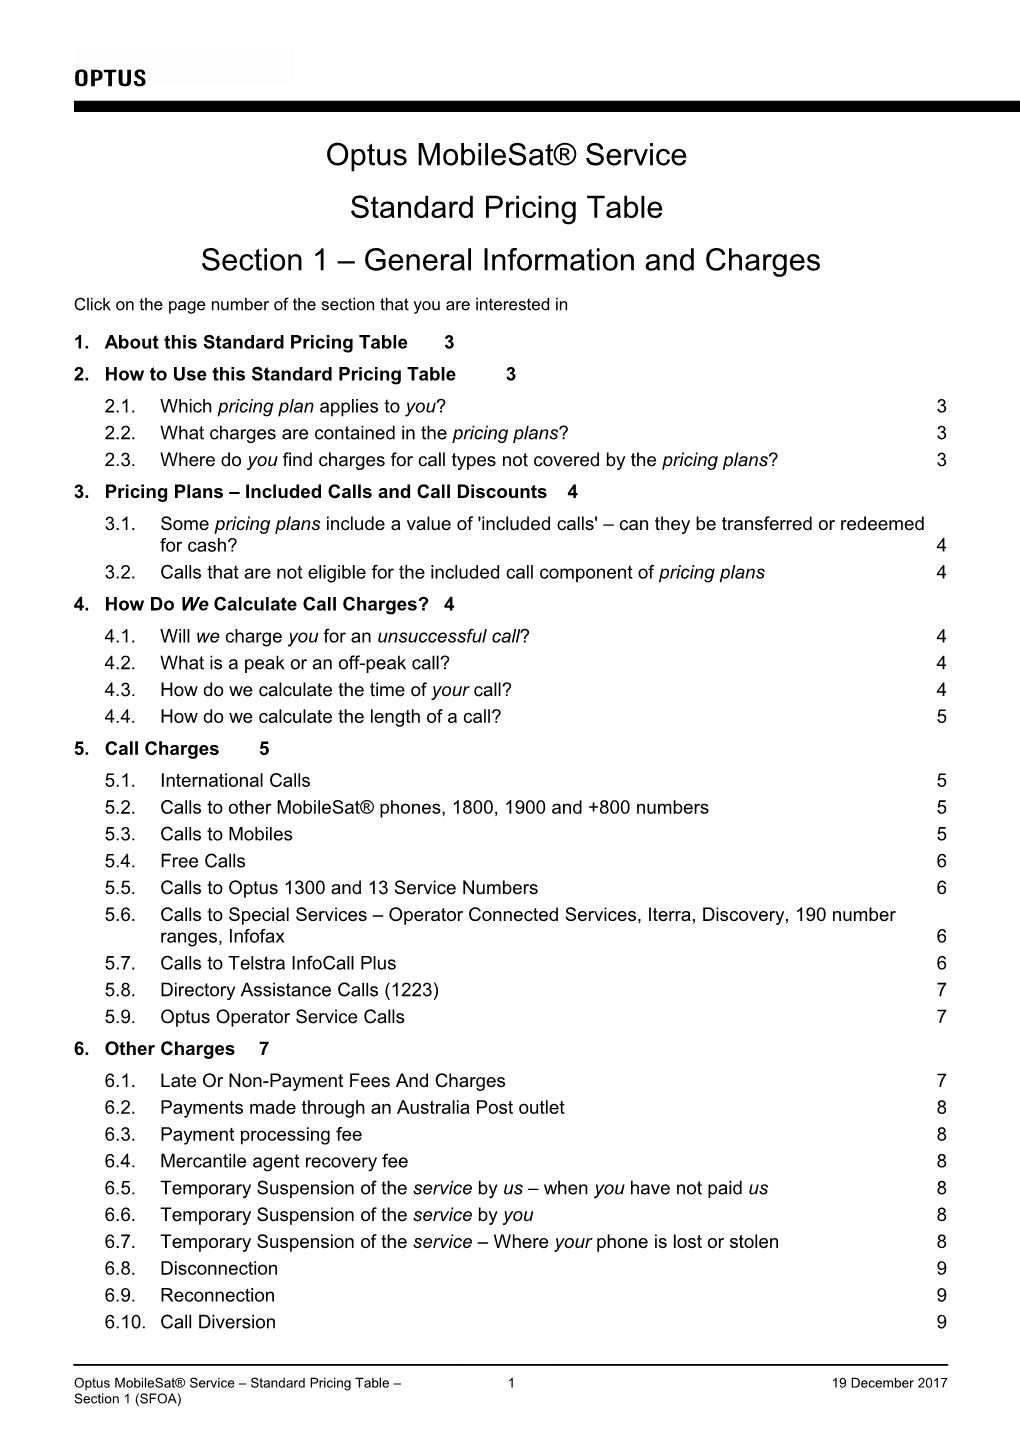 Section 1 General Information and Charges